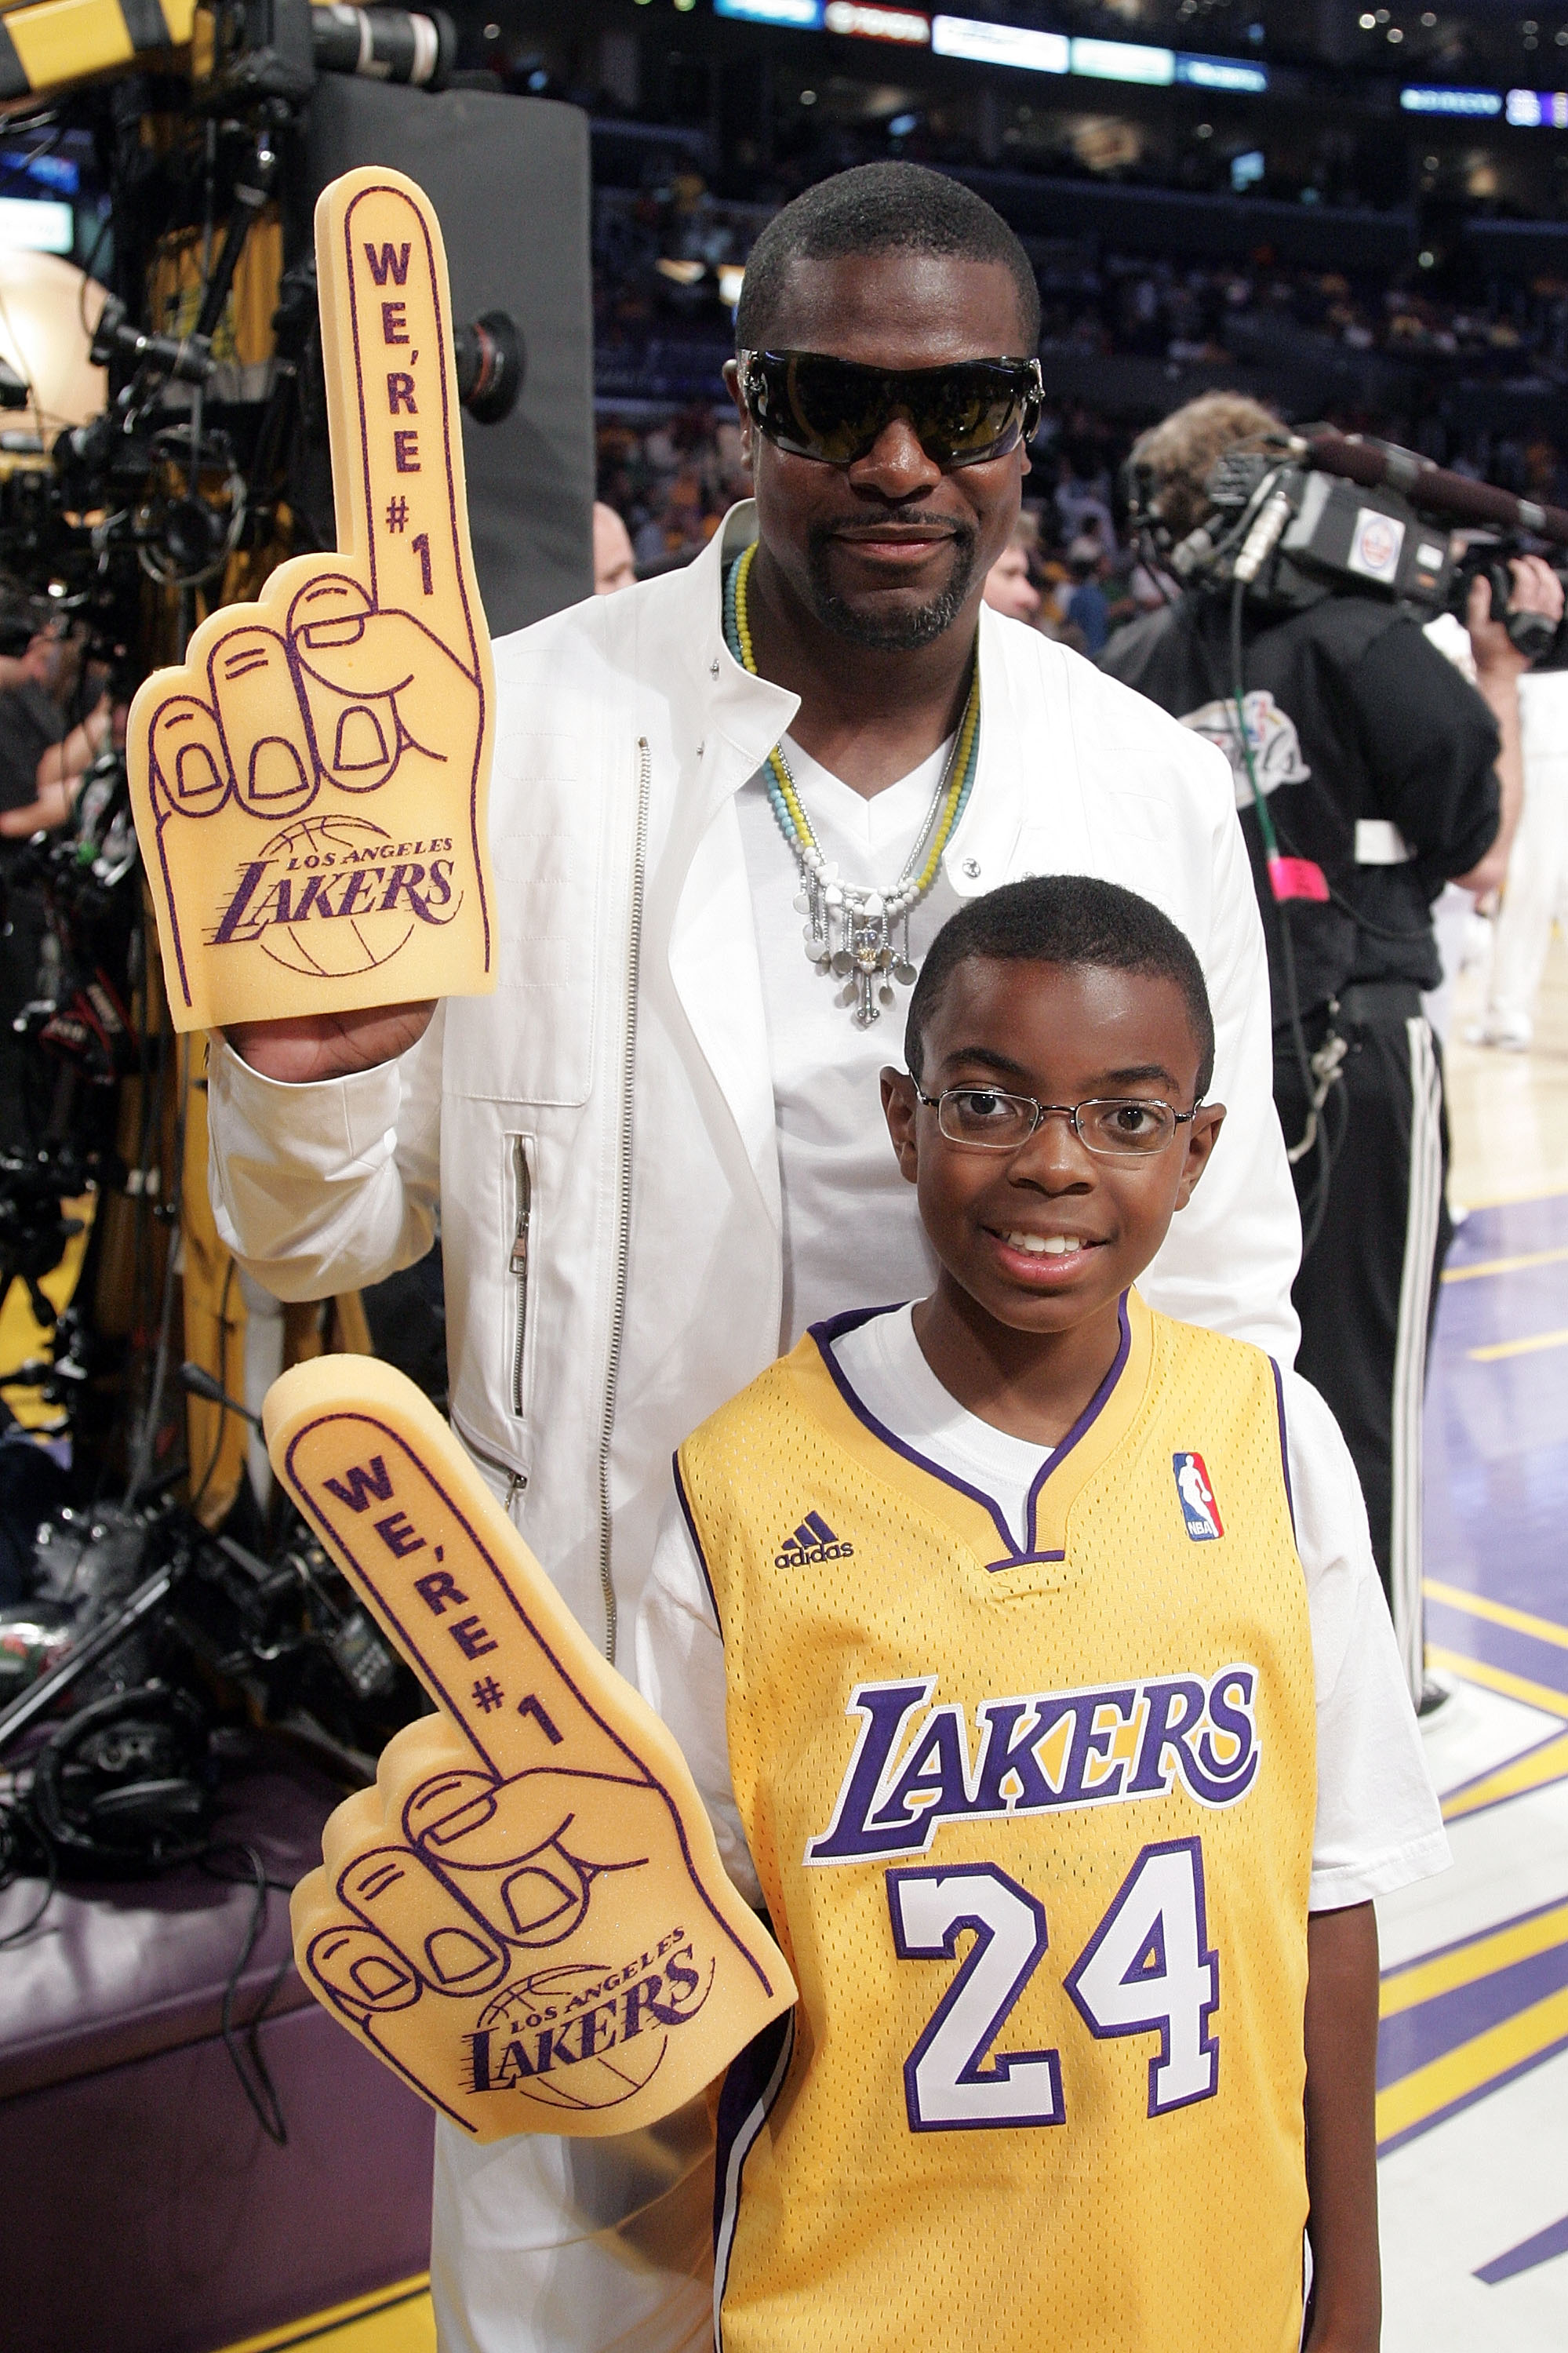 Chris Tucker and Destin Christopher during Game Five of the 2008 NBA Finals on June 15, 2008, at Staples Center in Los Angeles, California. | Source: Getty Images